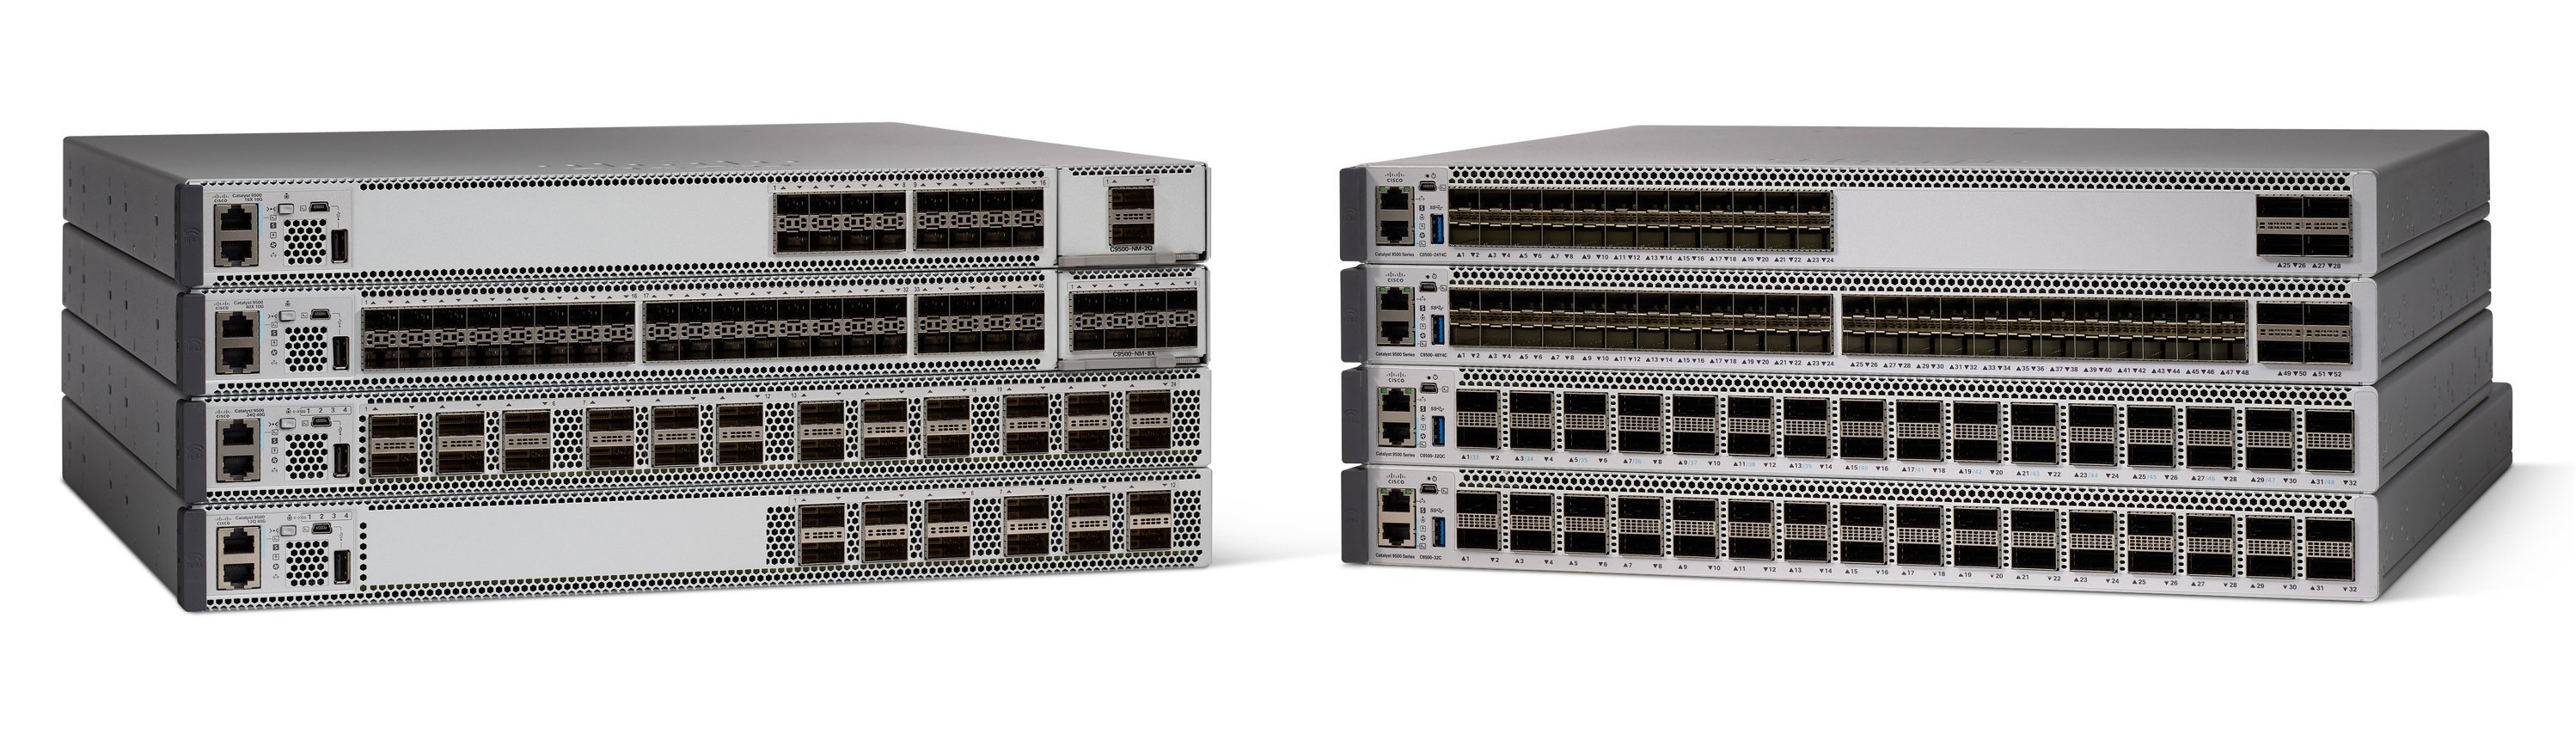 Product image of Cisco Catalyst 9500 Series Switches